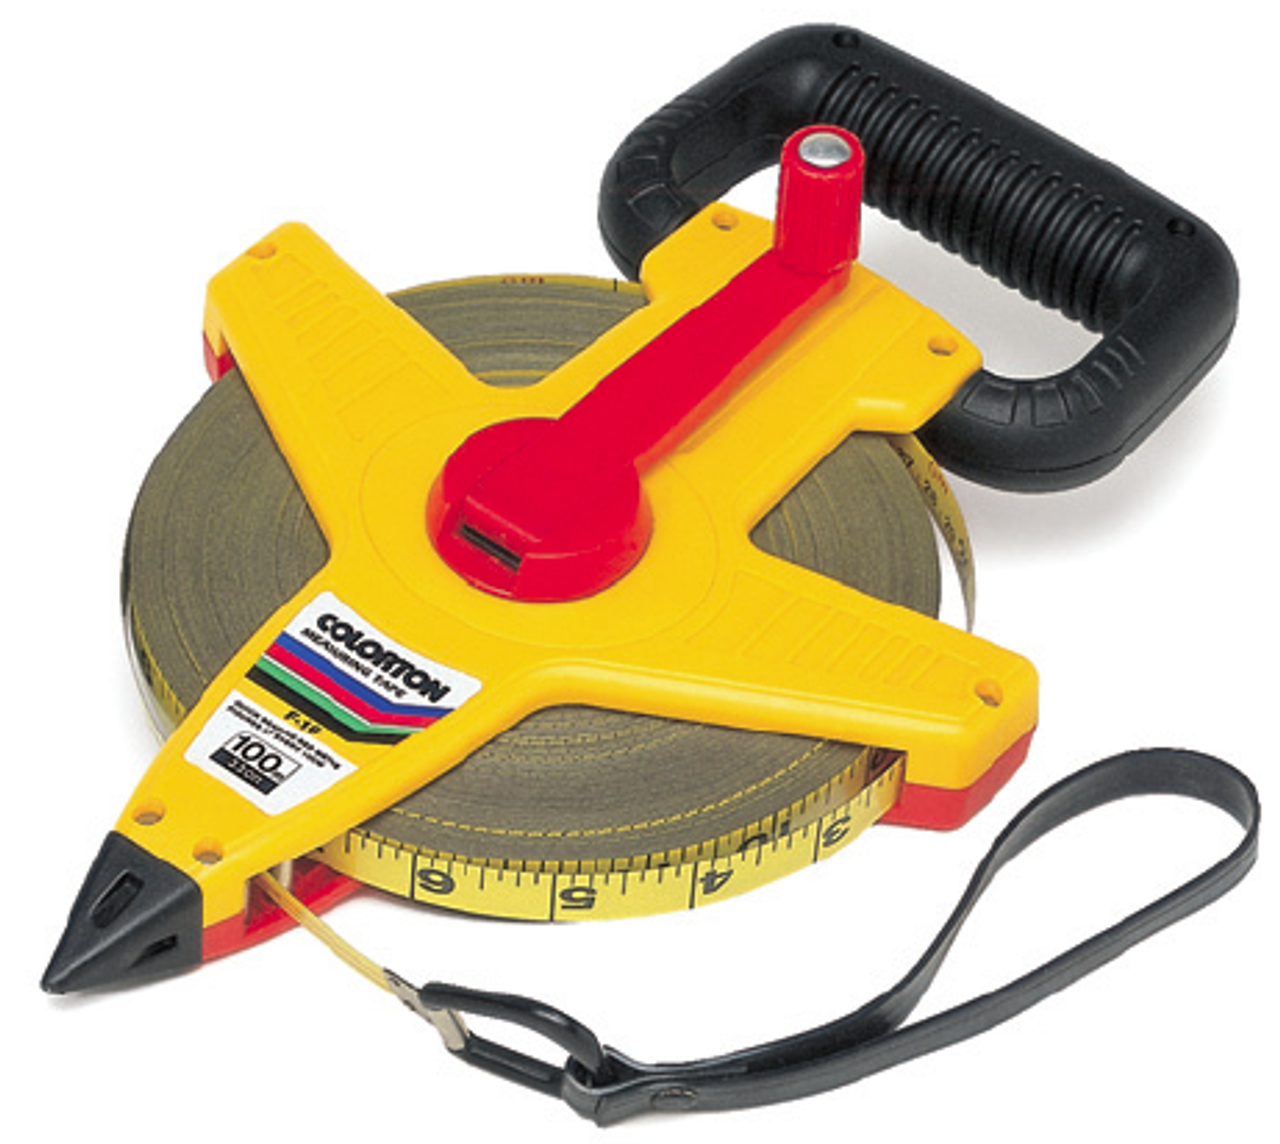 Measuring Tapes - Gilson Co.